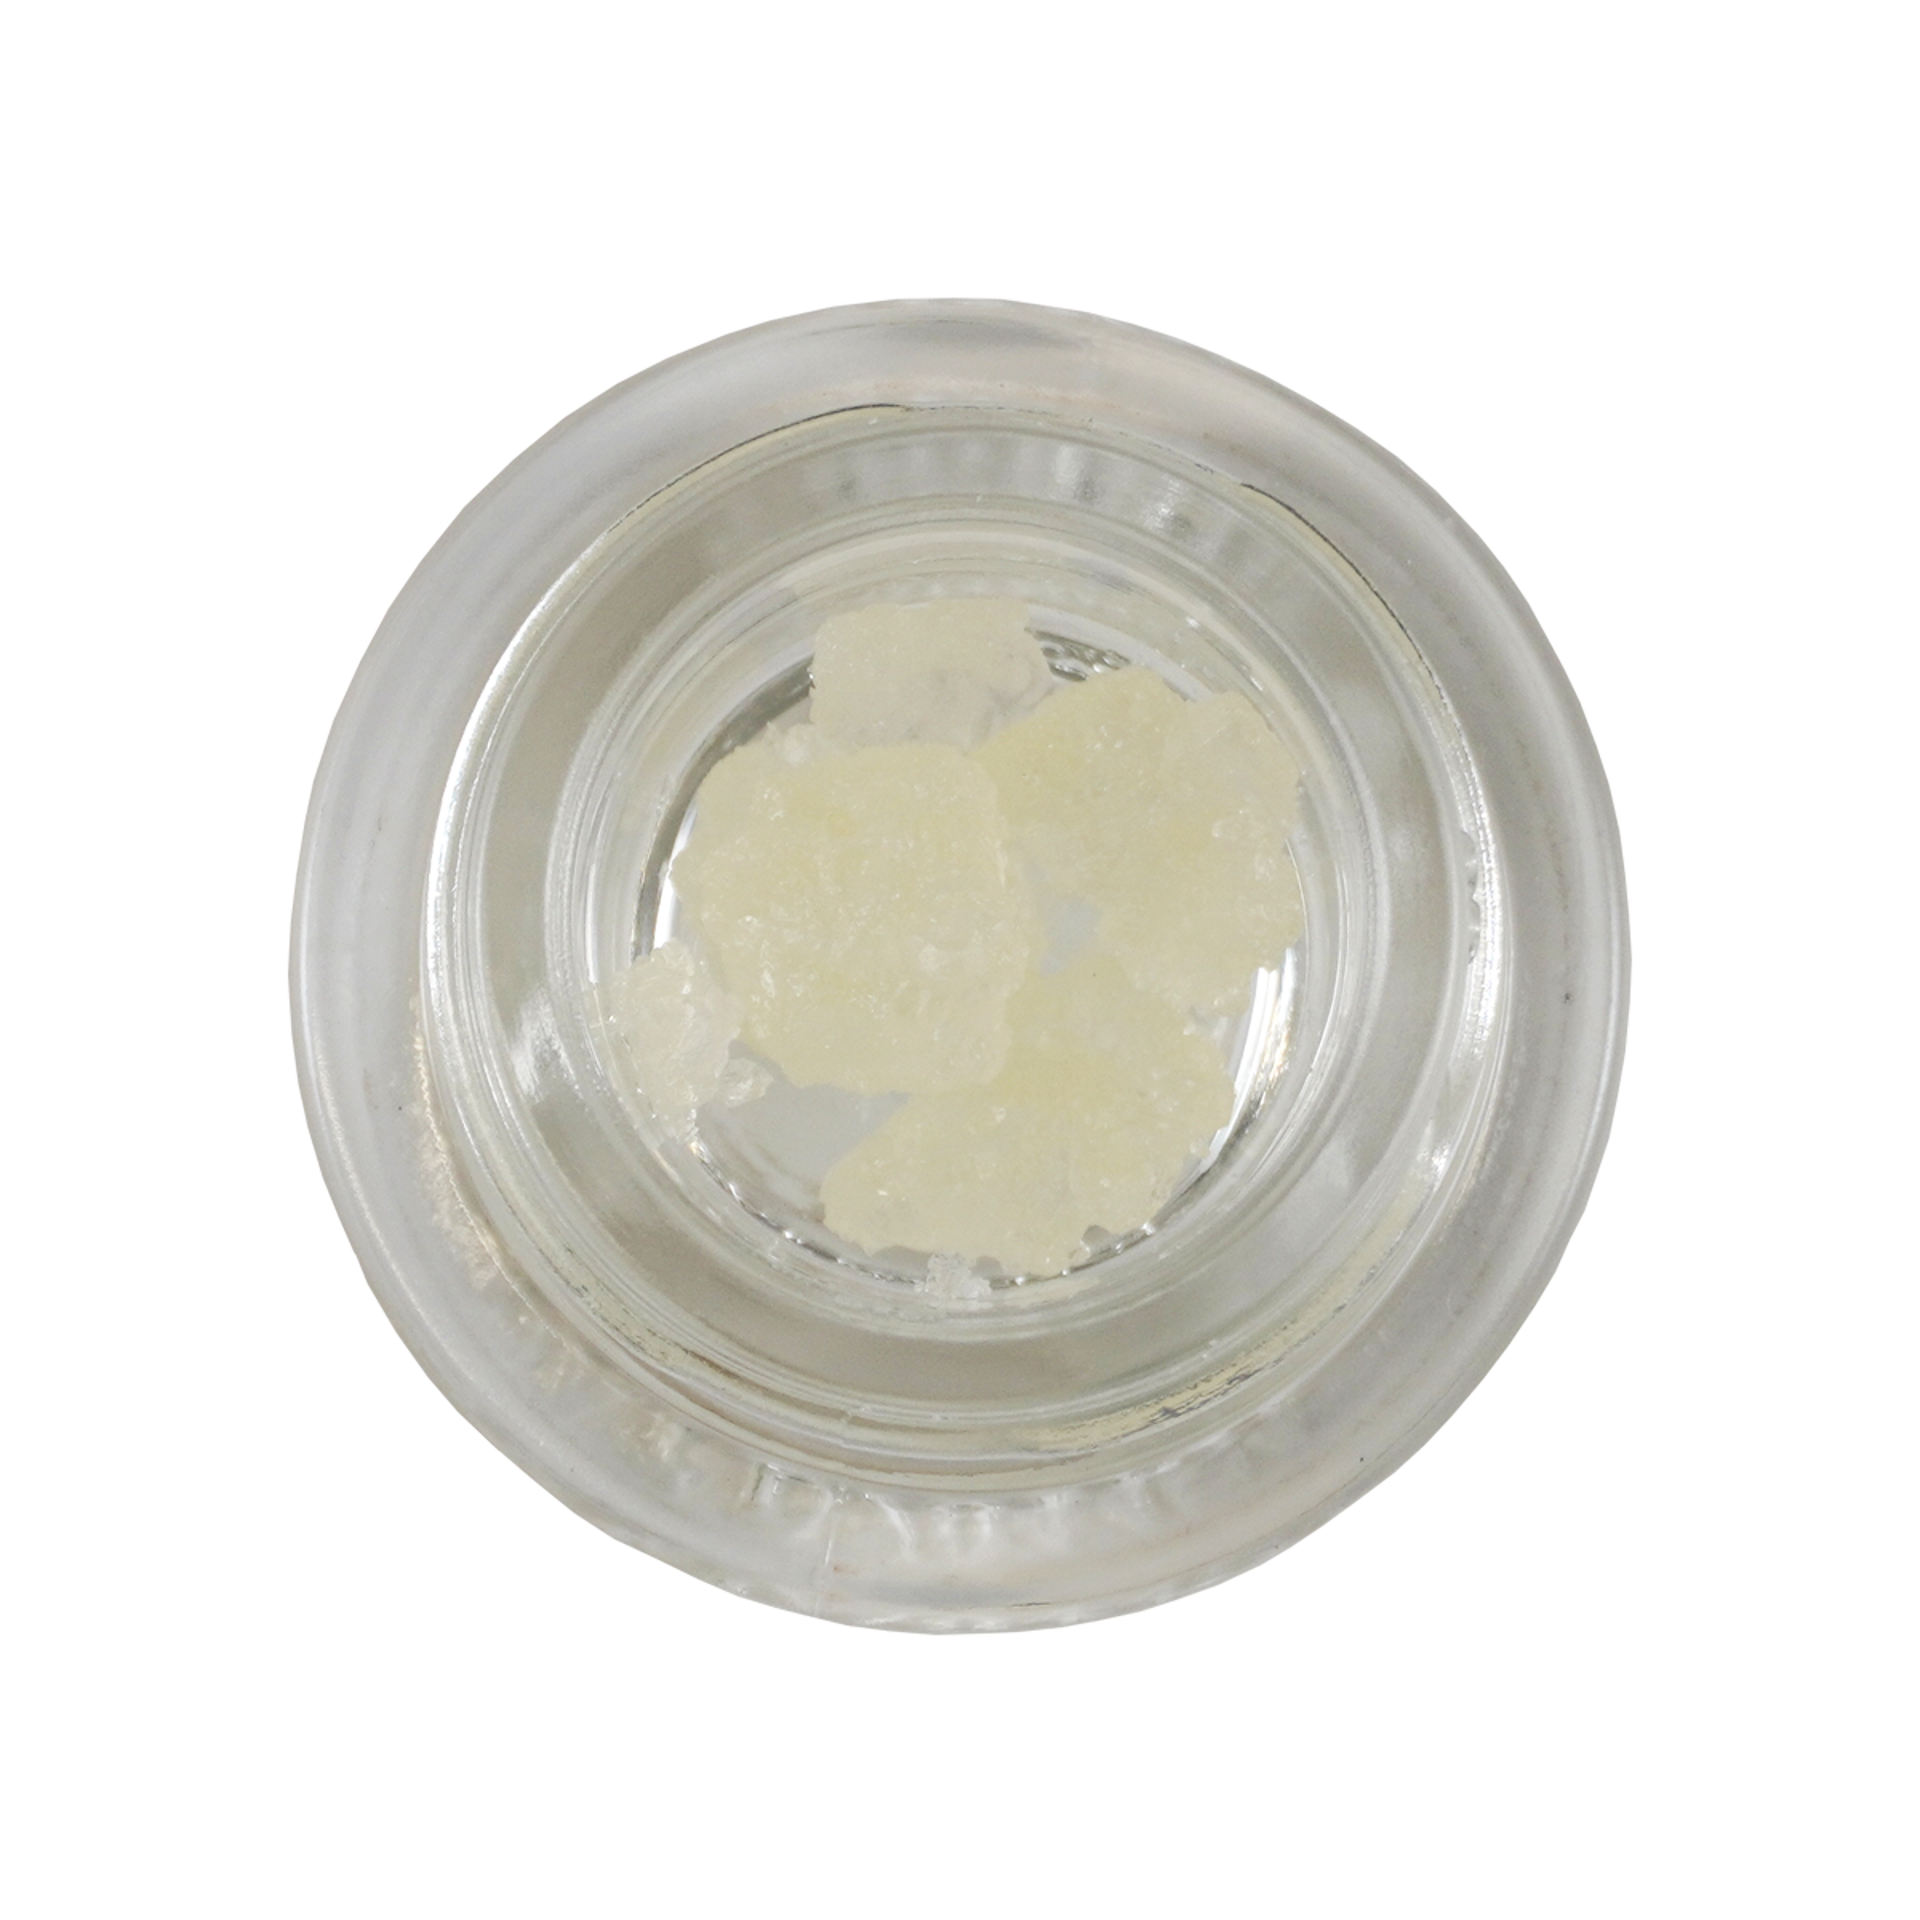 Spiked Punch Live Resin Diamond 1g